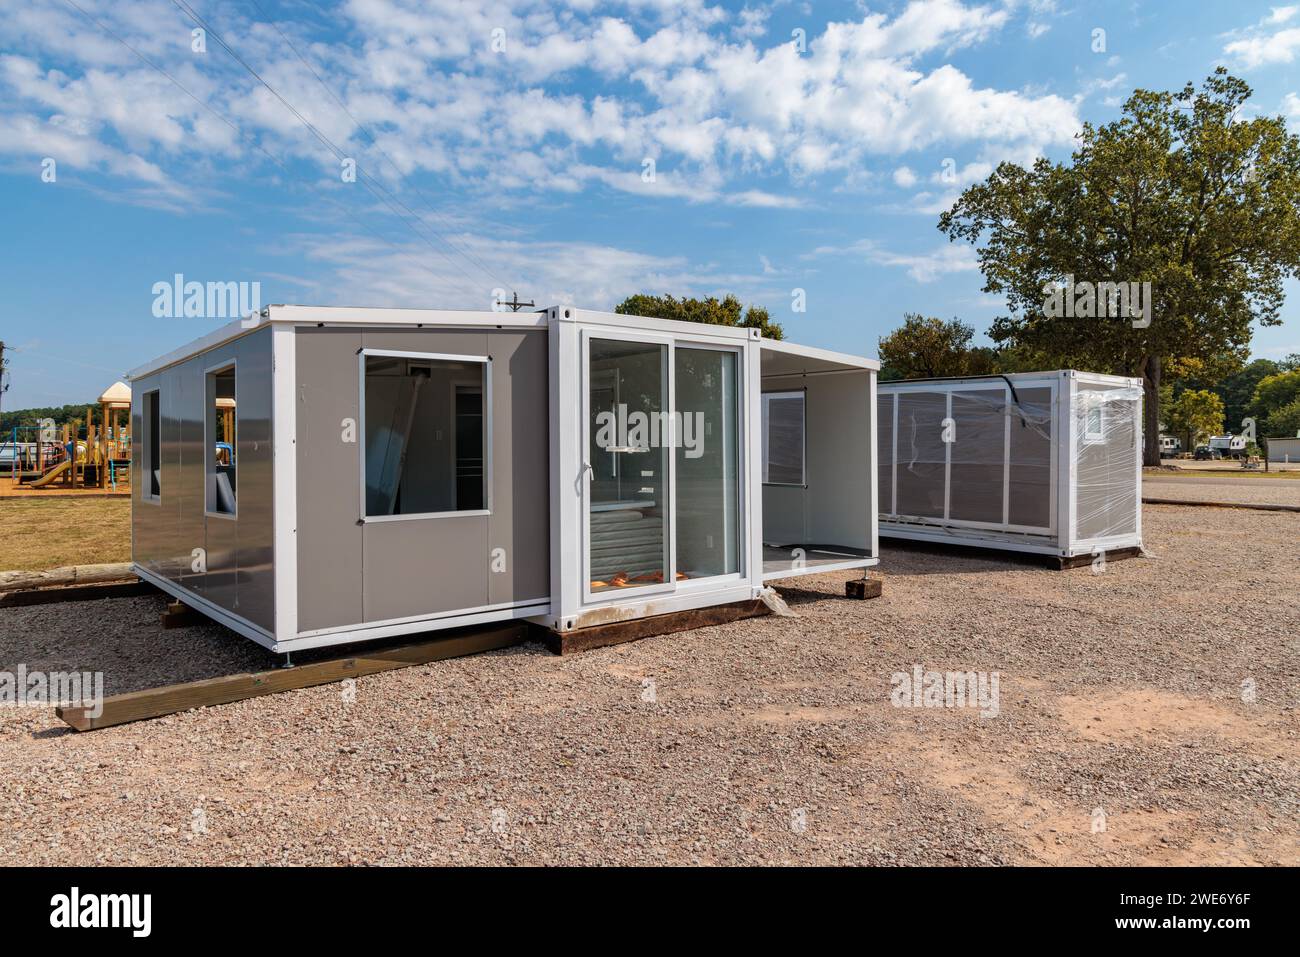 Foldable tiny house container kit home partially unfolded at Botel Campground near Savannah, Tennessee Stock Photo